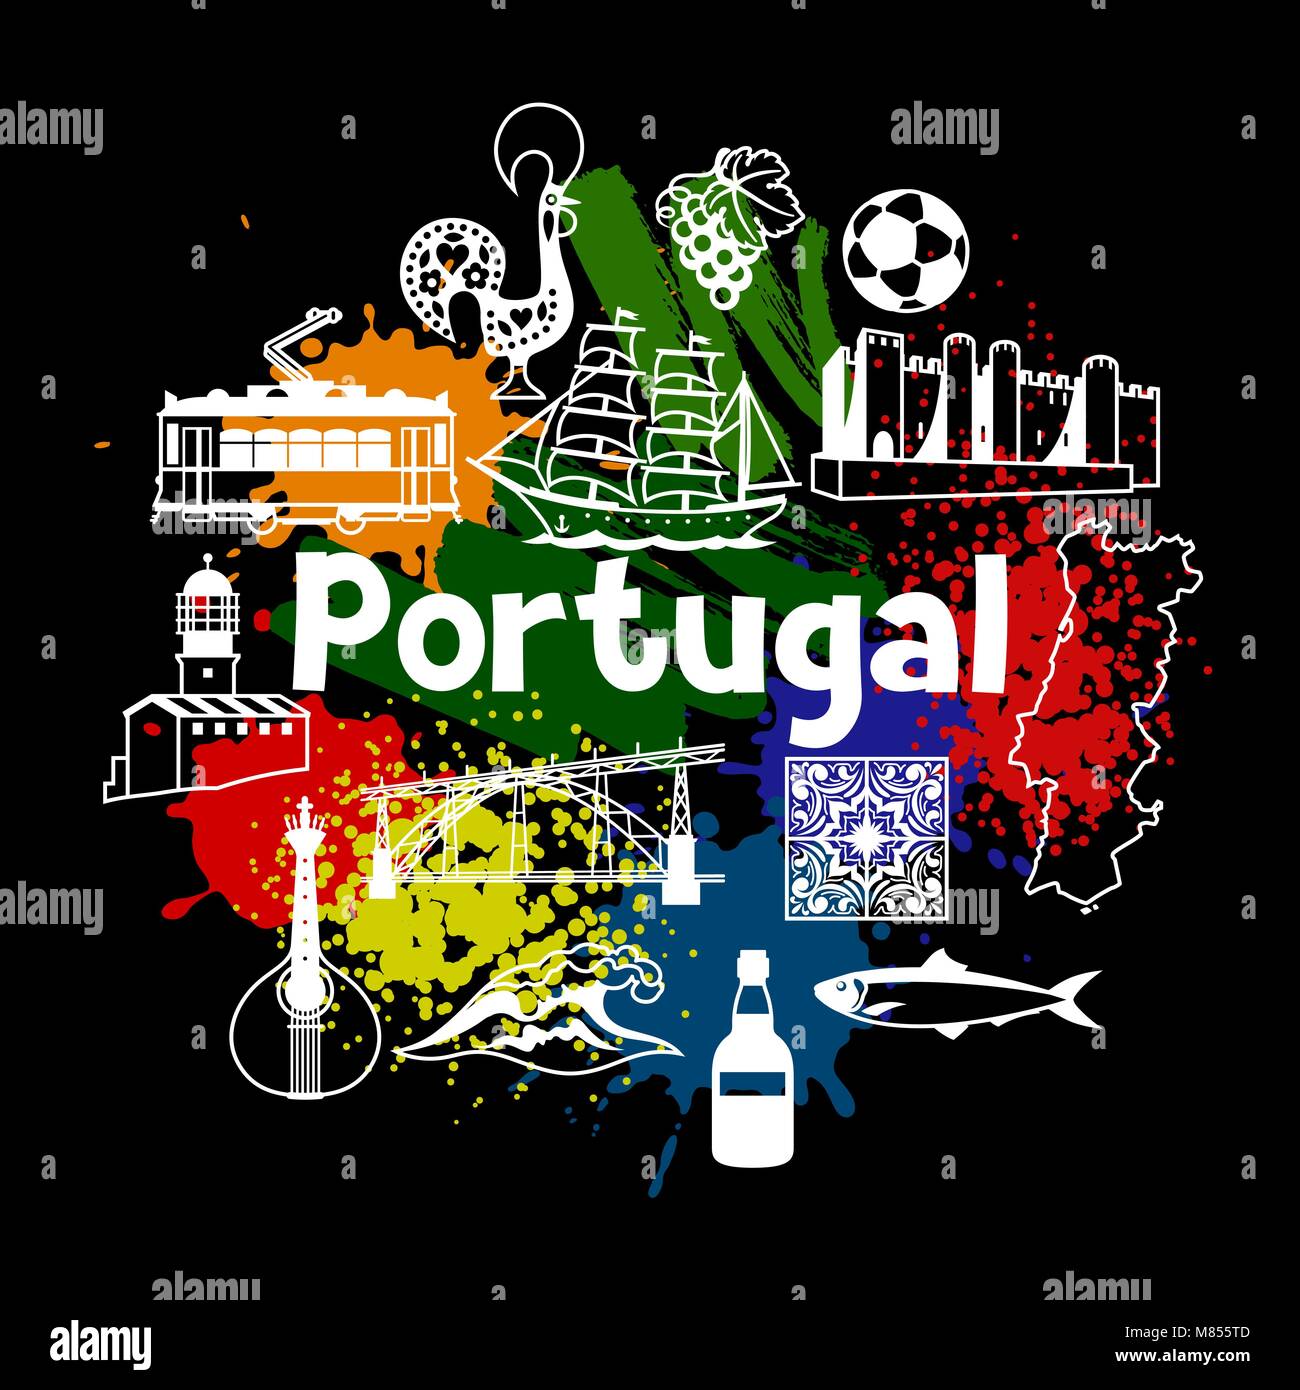 Portugal print design. Portuguese national traditional symbols and objects Stock Vector